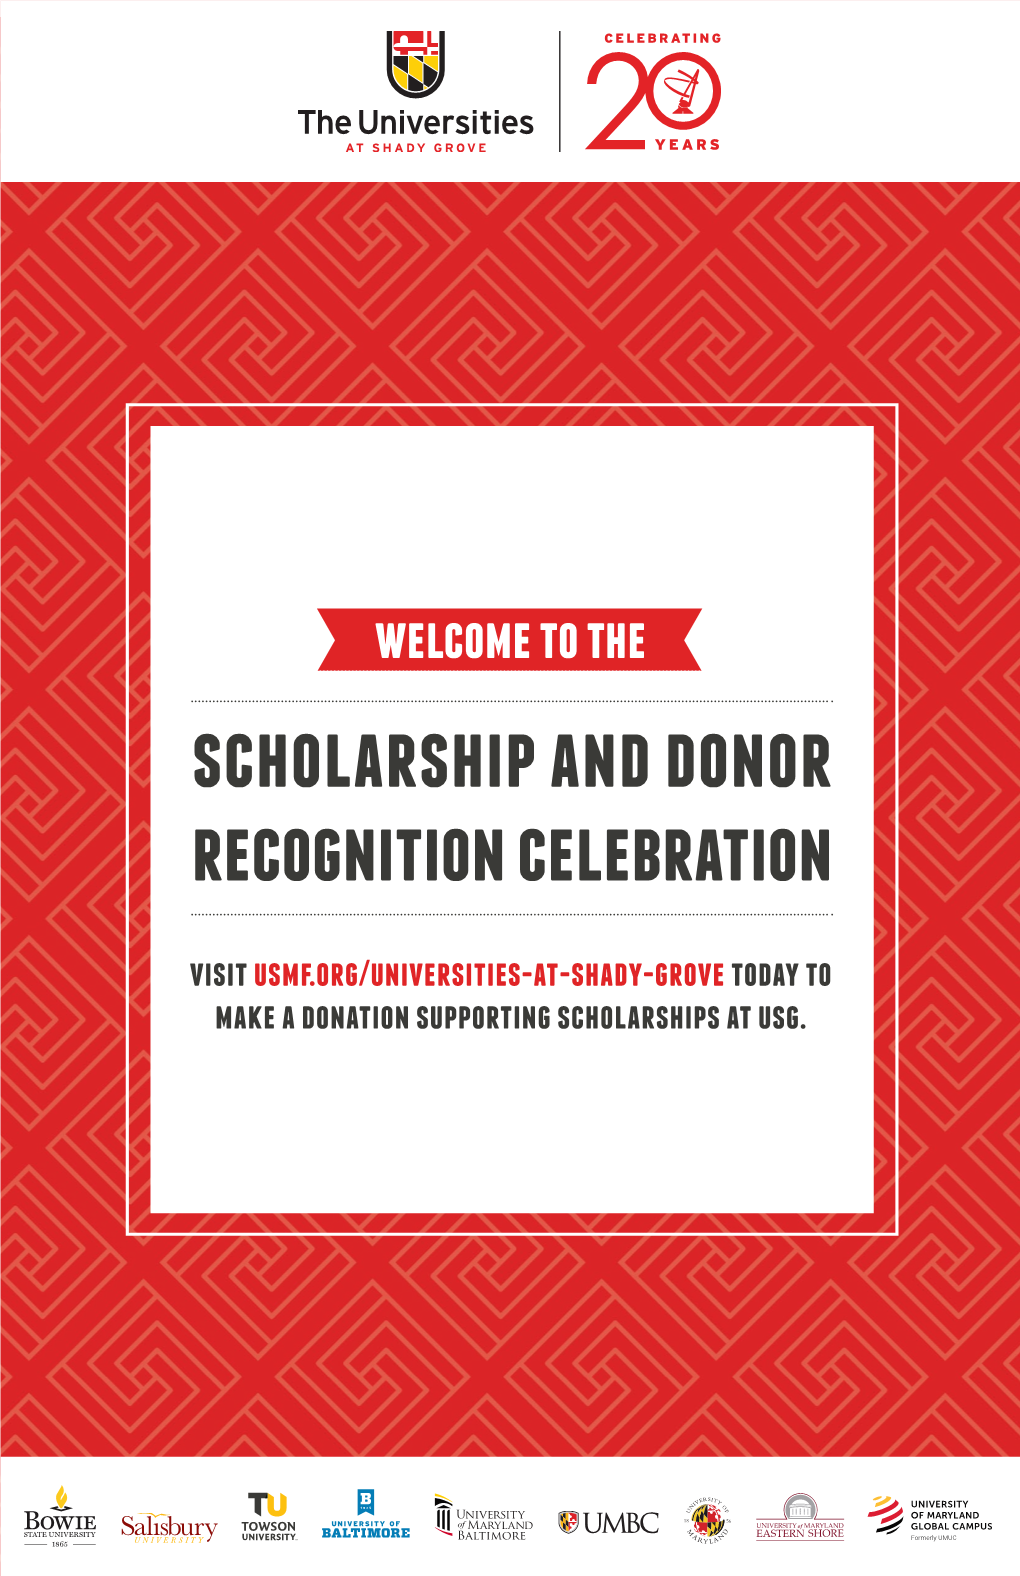 Scholarship and Donor Recognition Celebration Visit Usmf.Org/Universities-At-Shady-Grove Today to Make a Donation Supporting Scholarships at Usg